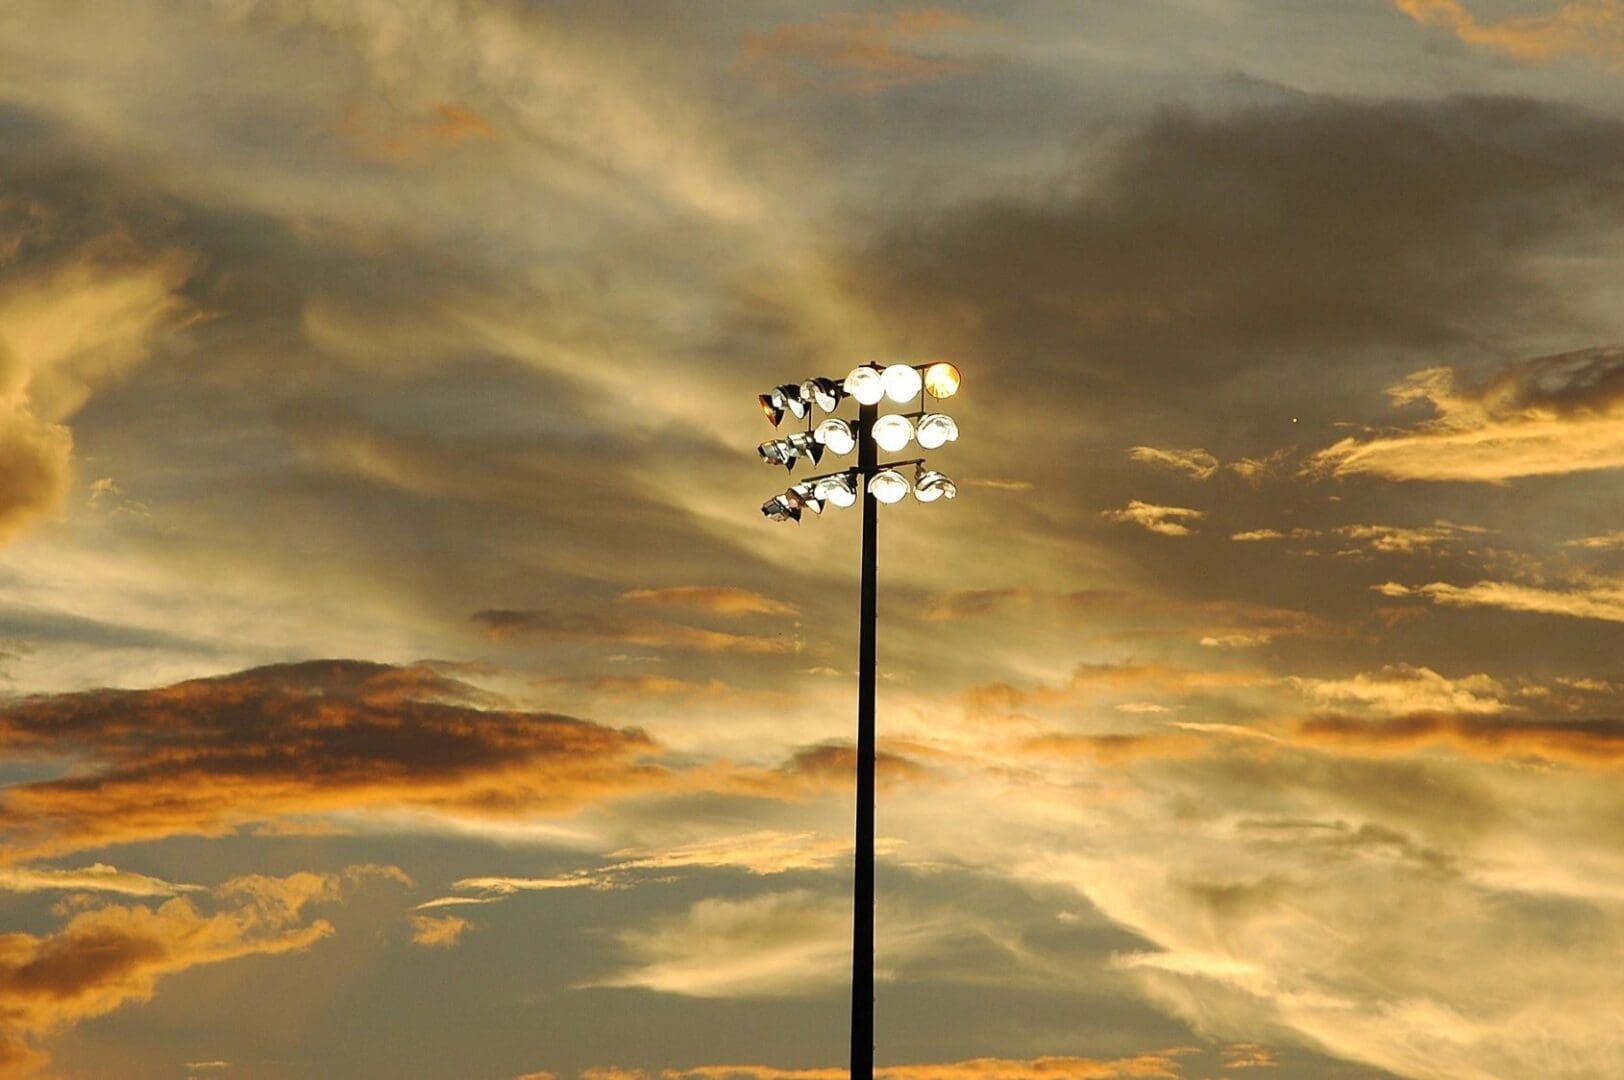 A stadium light with a cloudy sky in the background.